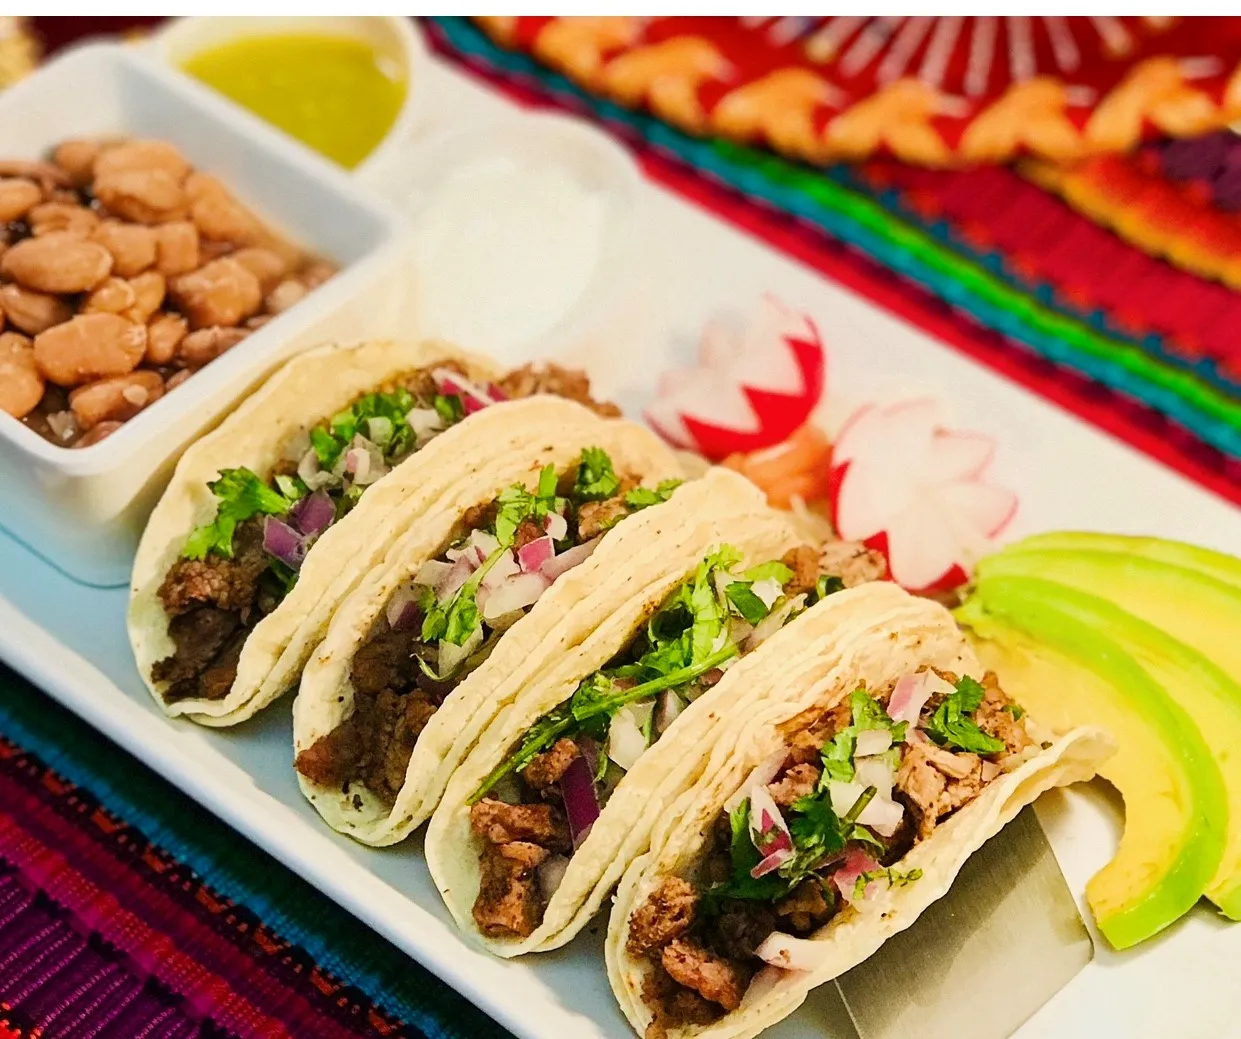 10 Best Tacos In Las Cruces New Mexico 2023 - Buyer's Guide